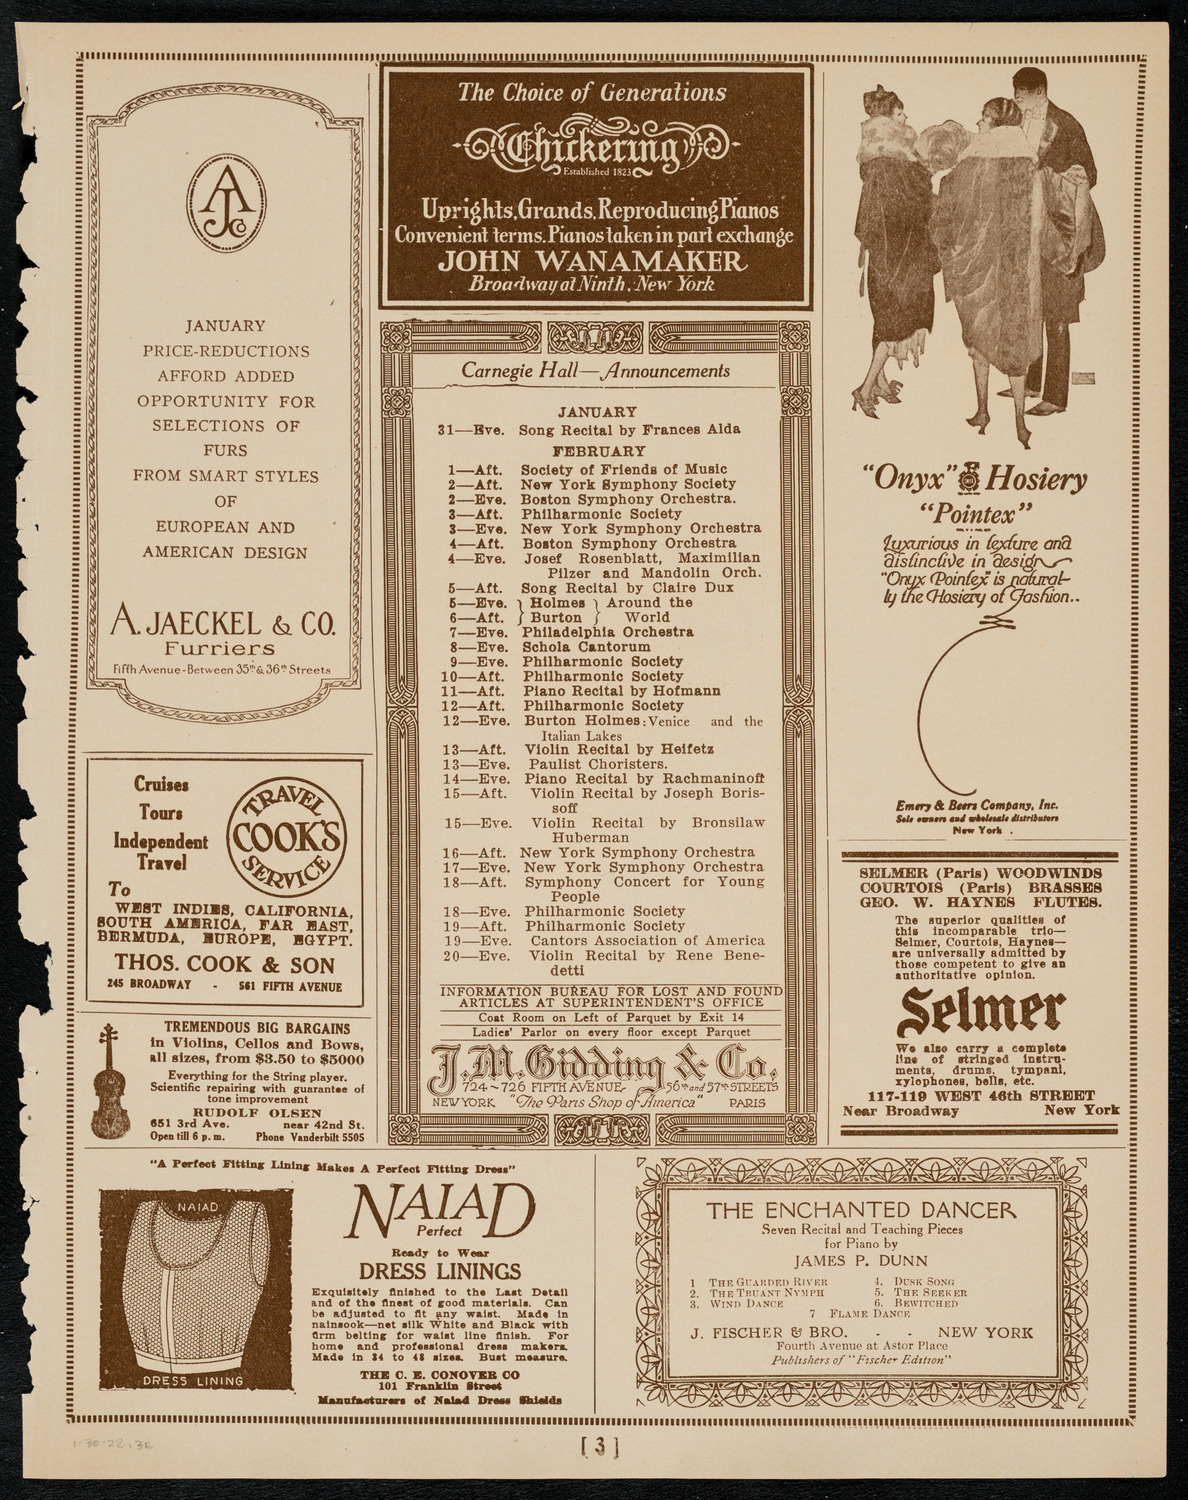 Mecca Temple of New York: Ancient Arabic Order of the Nobles of the Mystic Shrine, January 30, 1922, program page 3